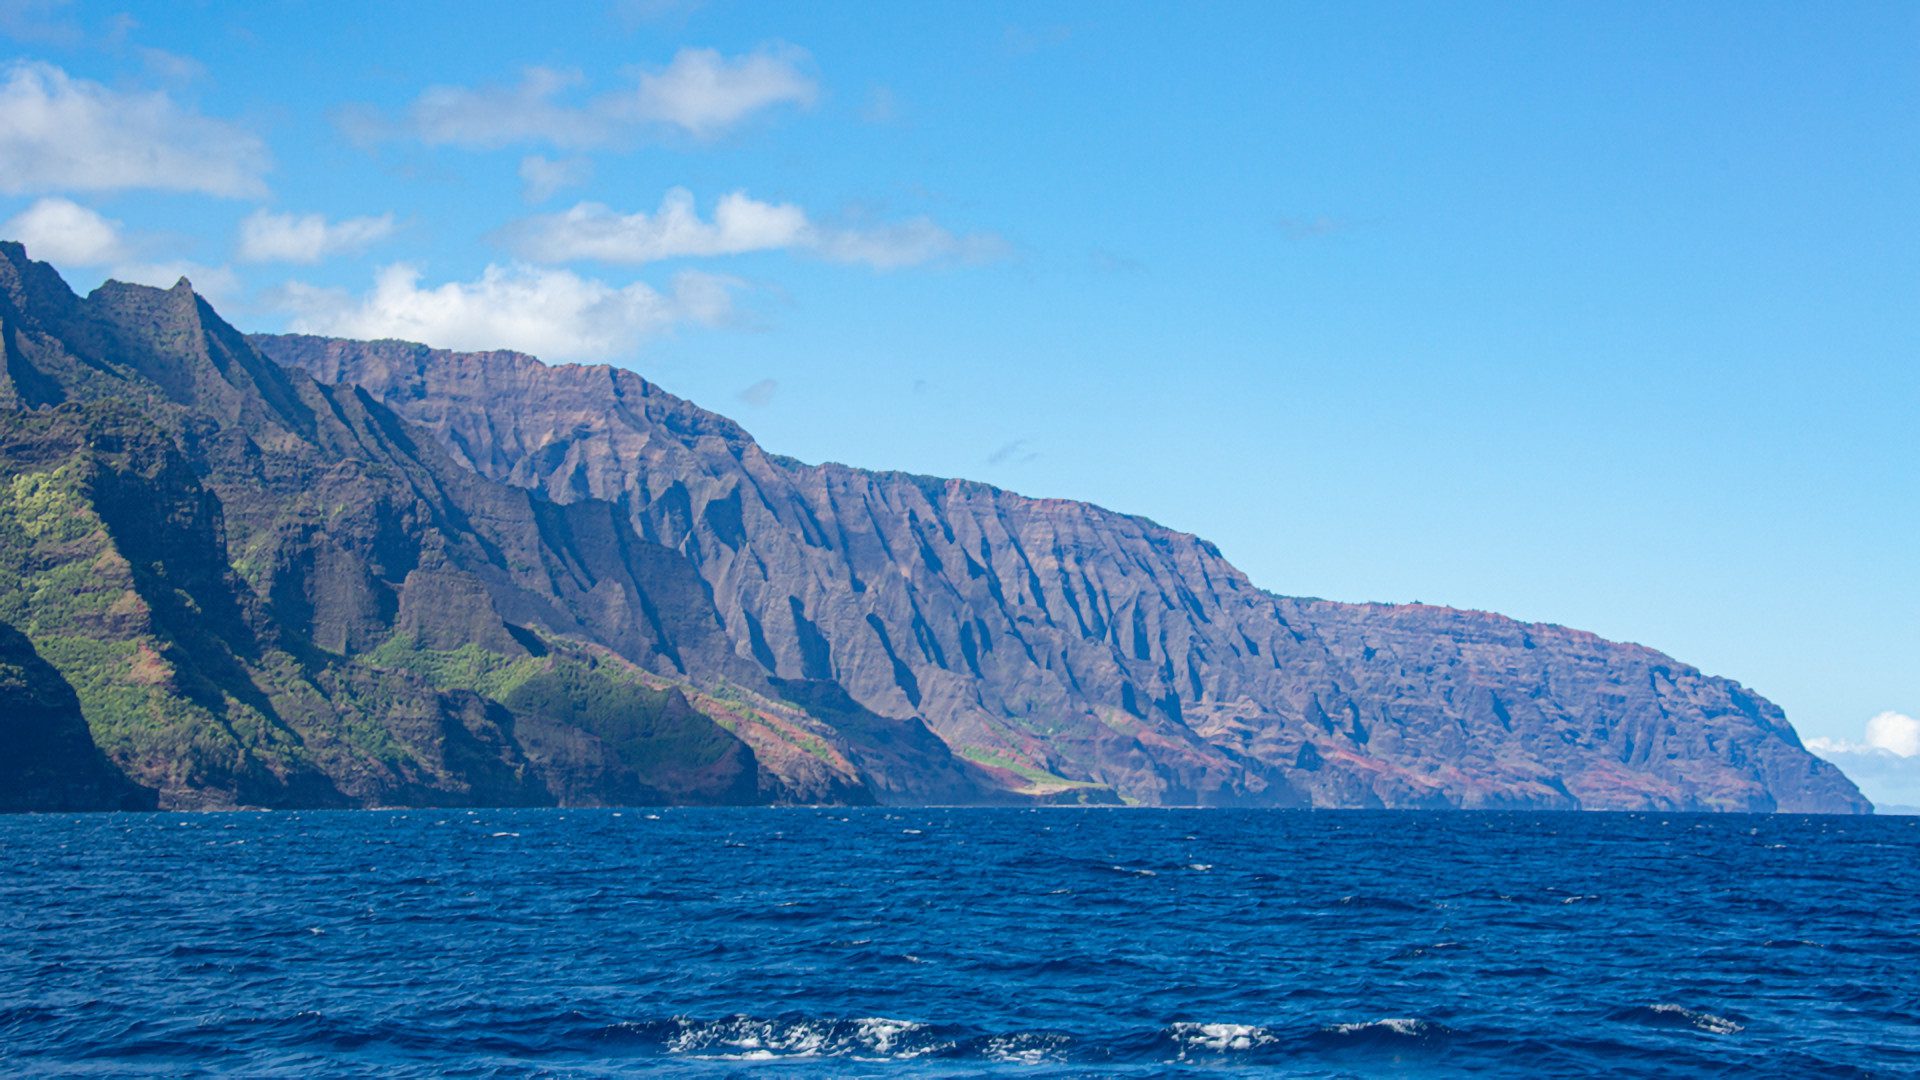 A Wide Angle Photography Of The Mountain and Sea